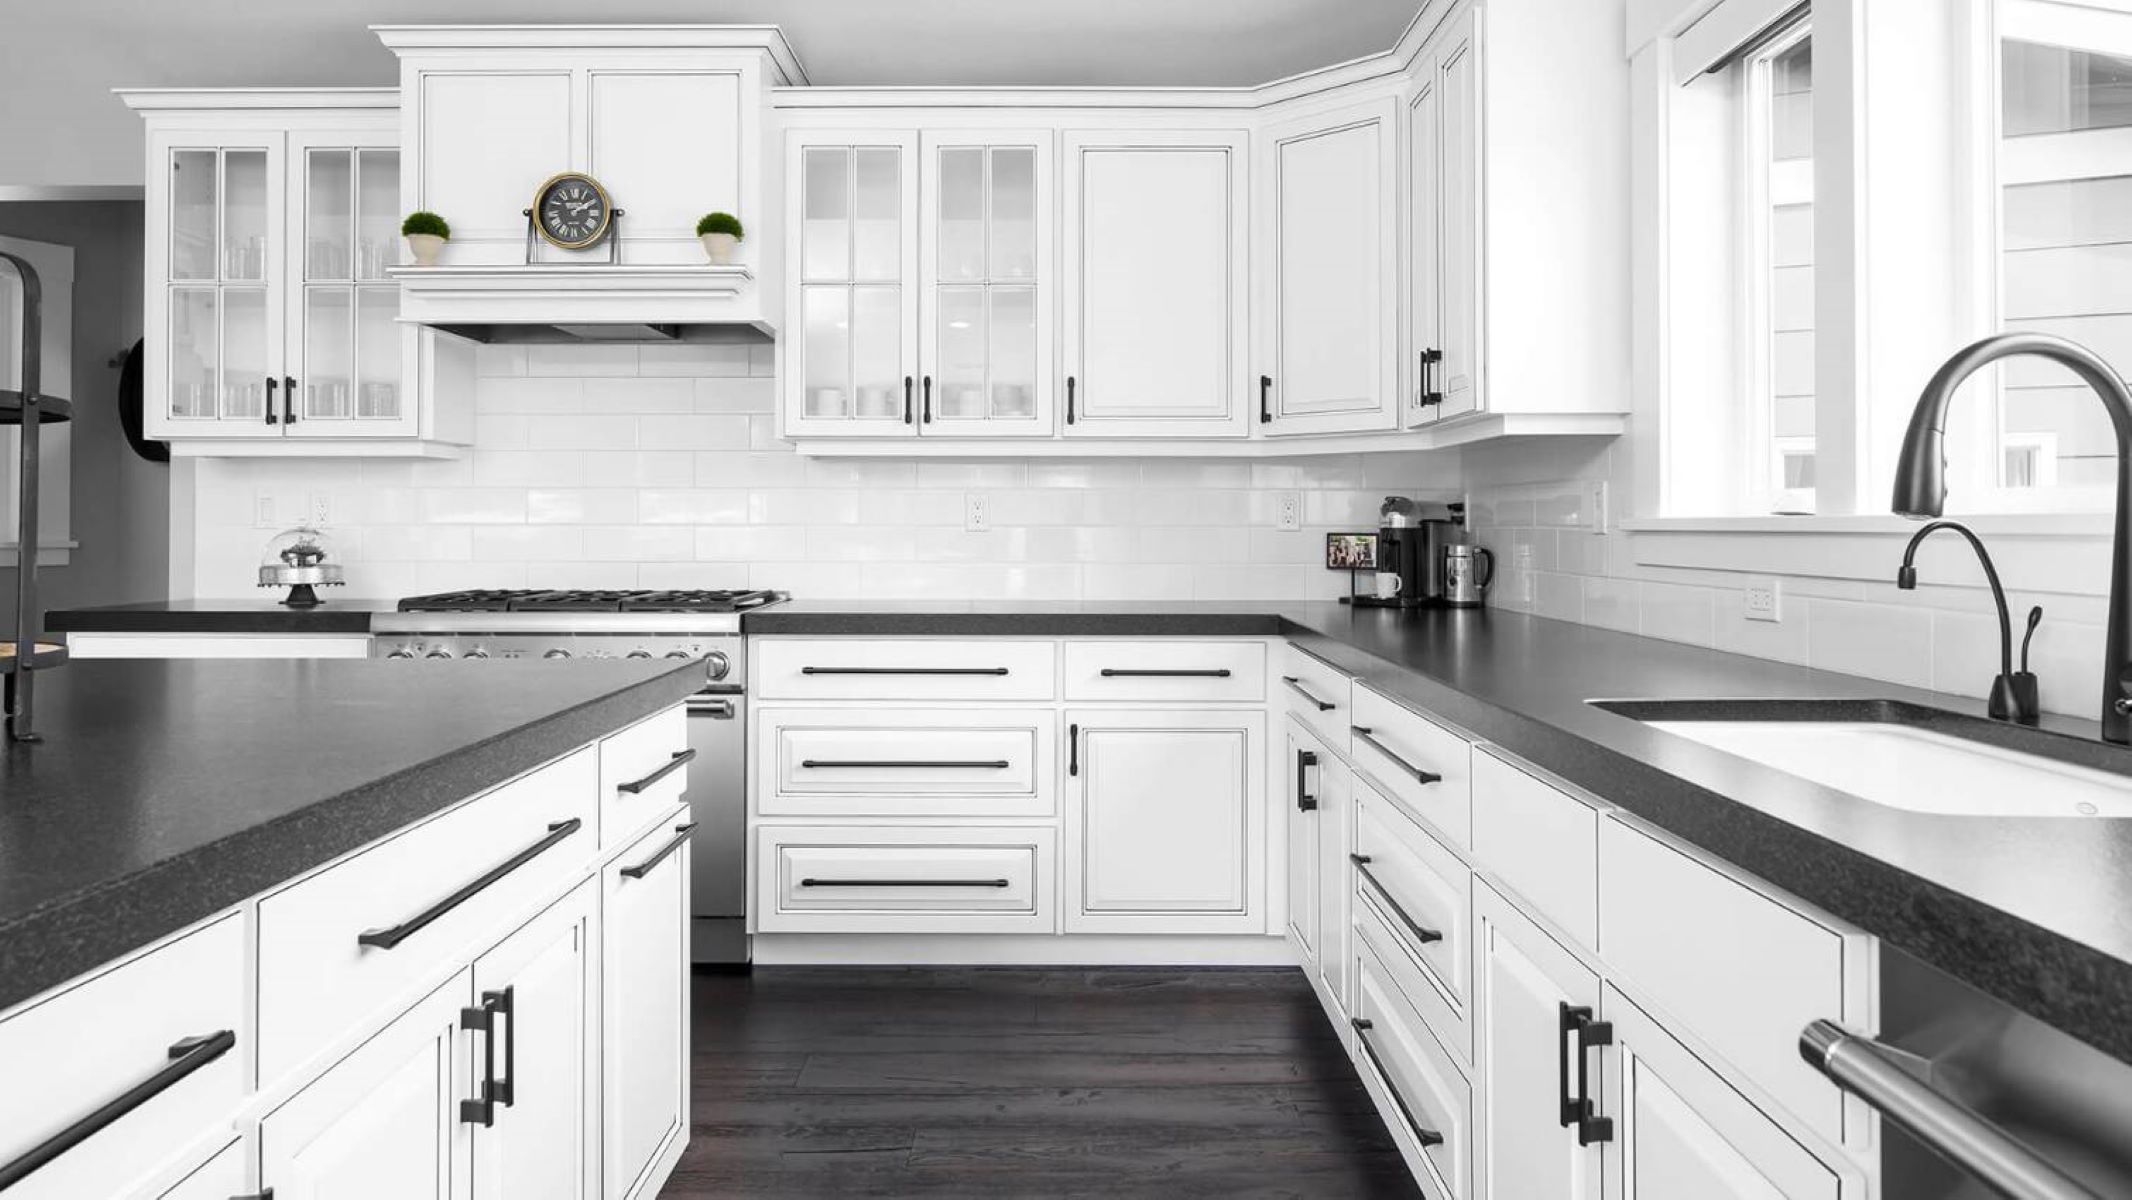 What Color Backsplash With White Cabinets And Black Countertops